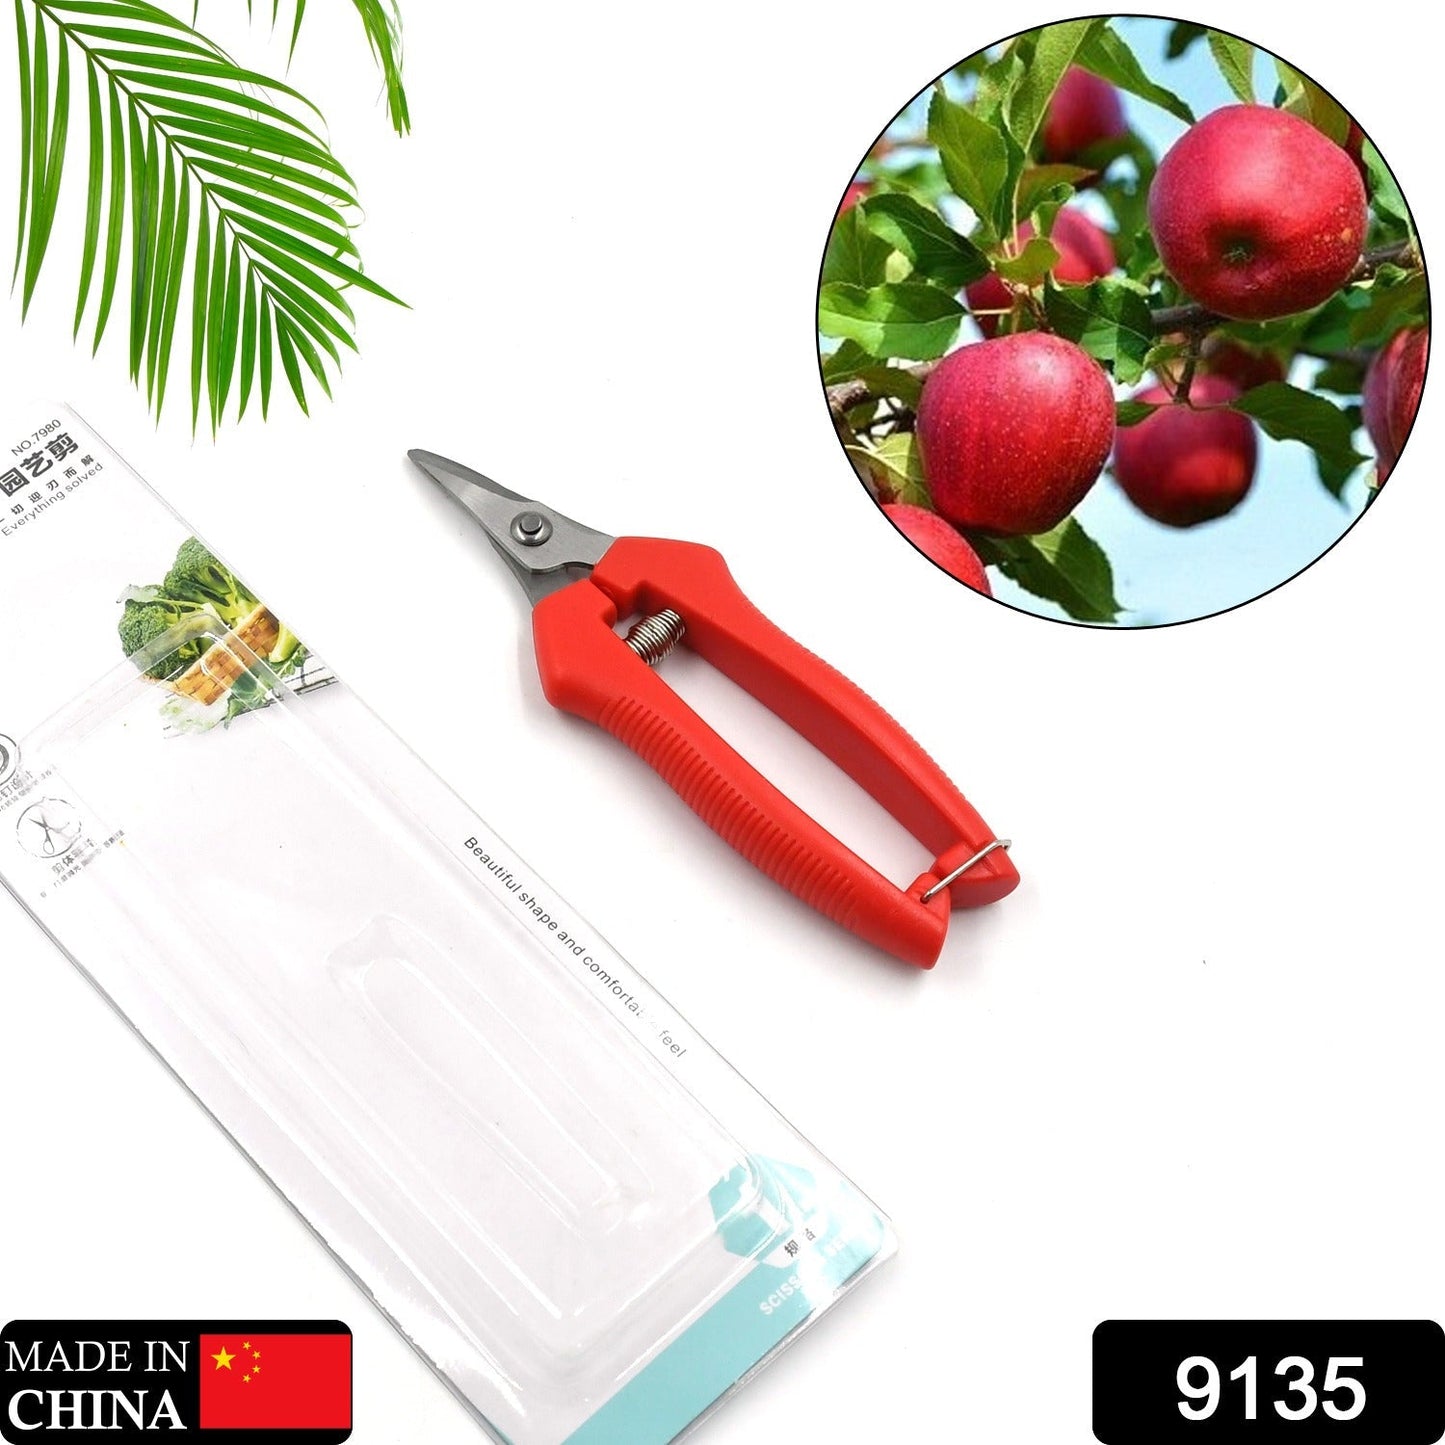 9135 Heavy Duty Stainless Steel Cutter, Non‑slip Trimming Scissors Durable Not Easy To Wear for Gardening Pruning Of Fruit Trees Flowers and Plants